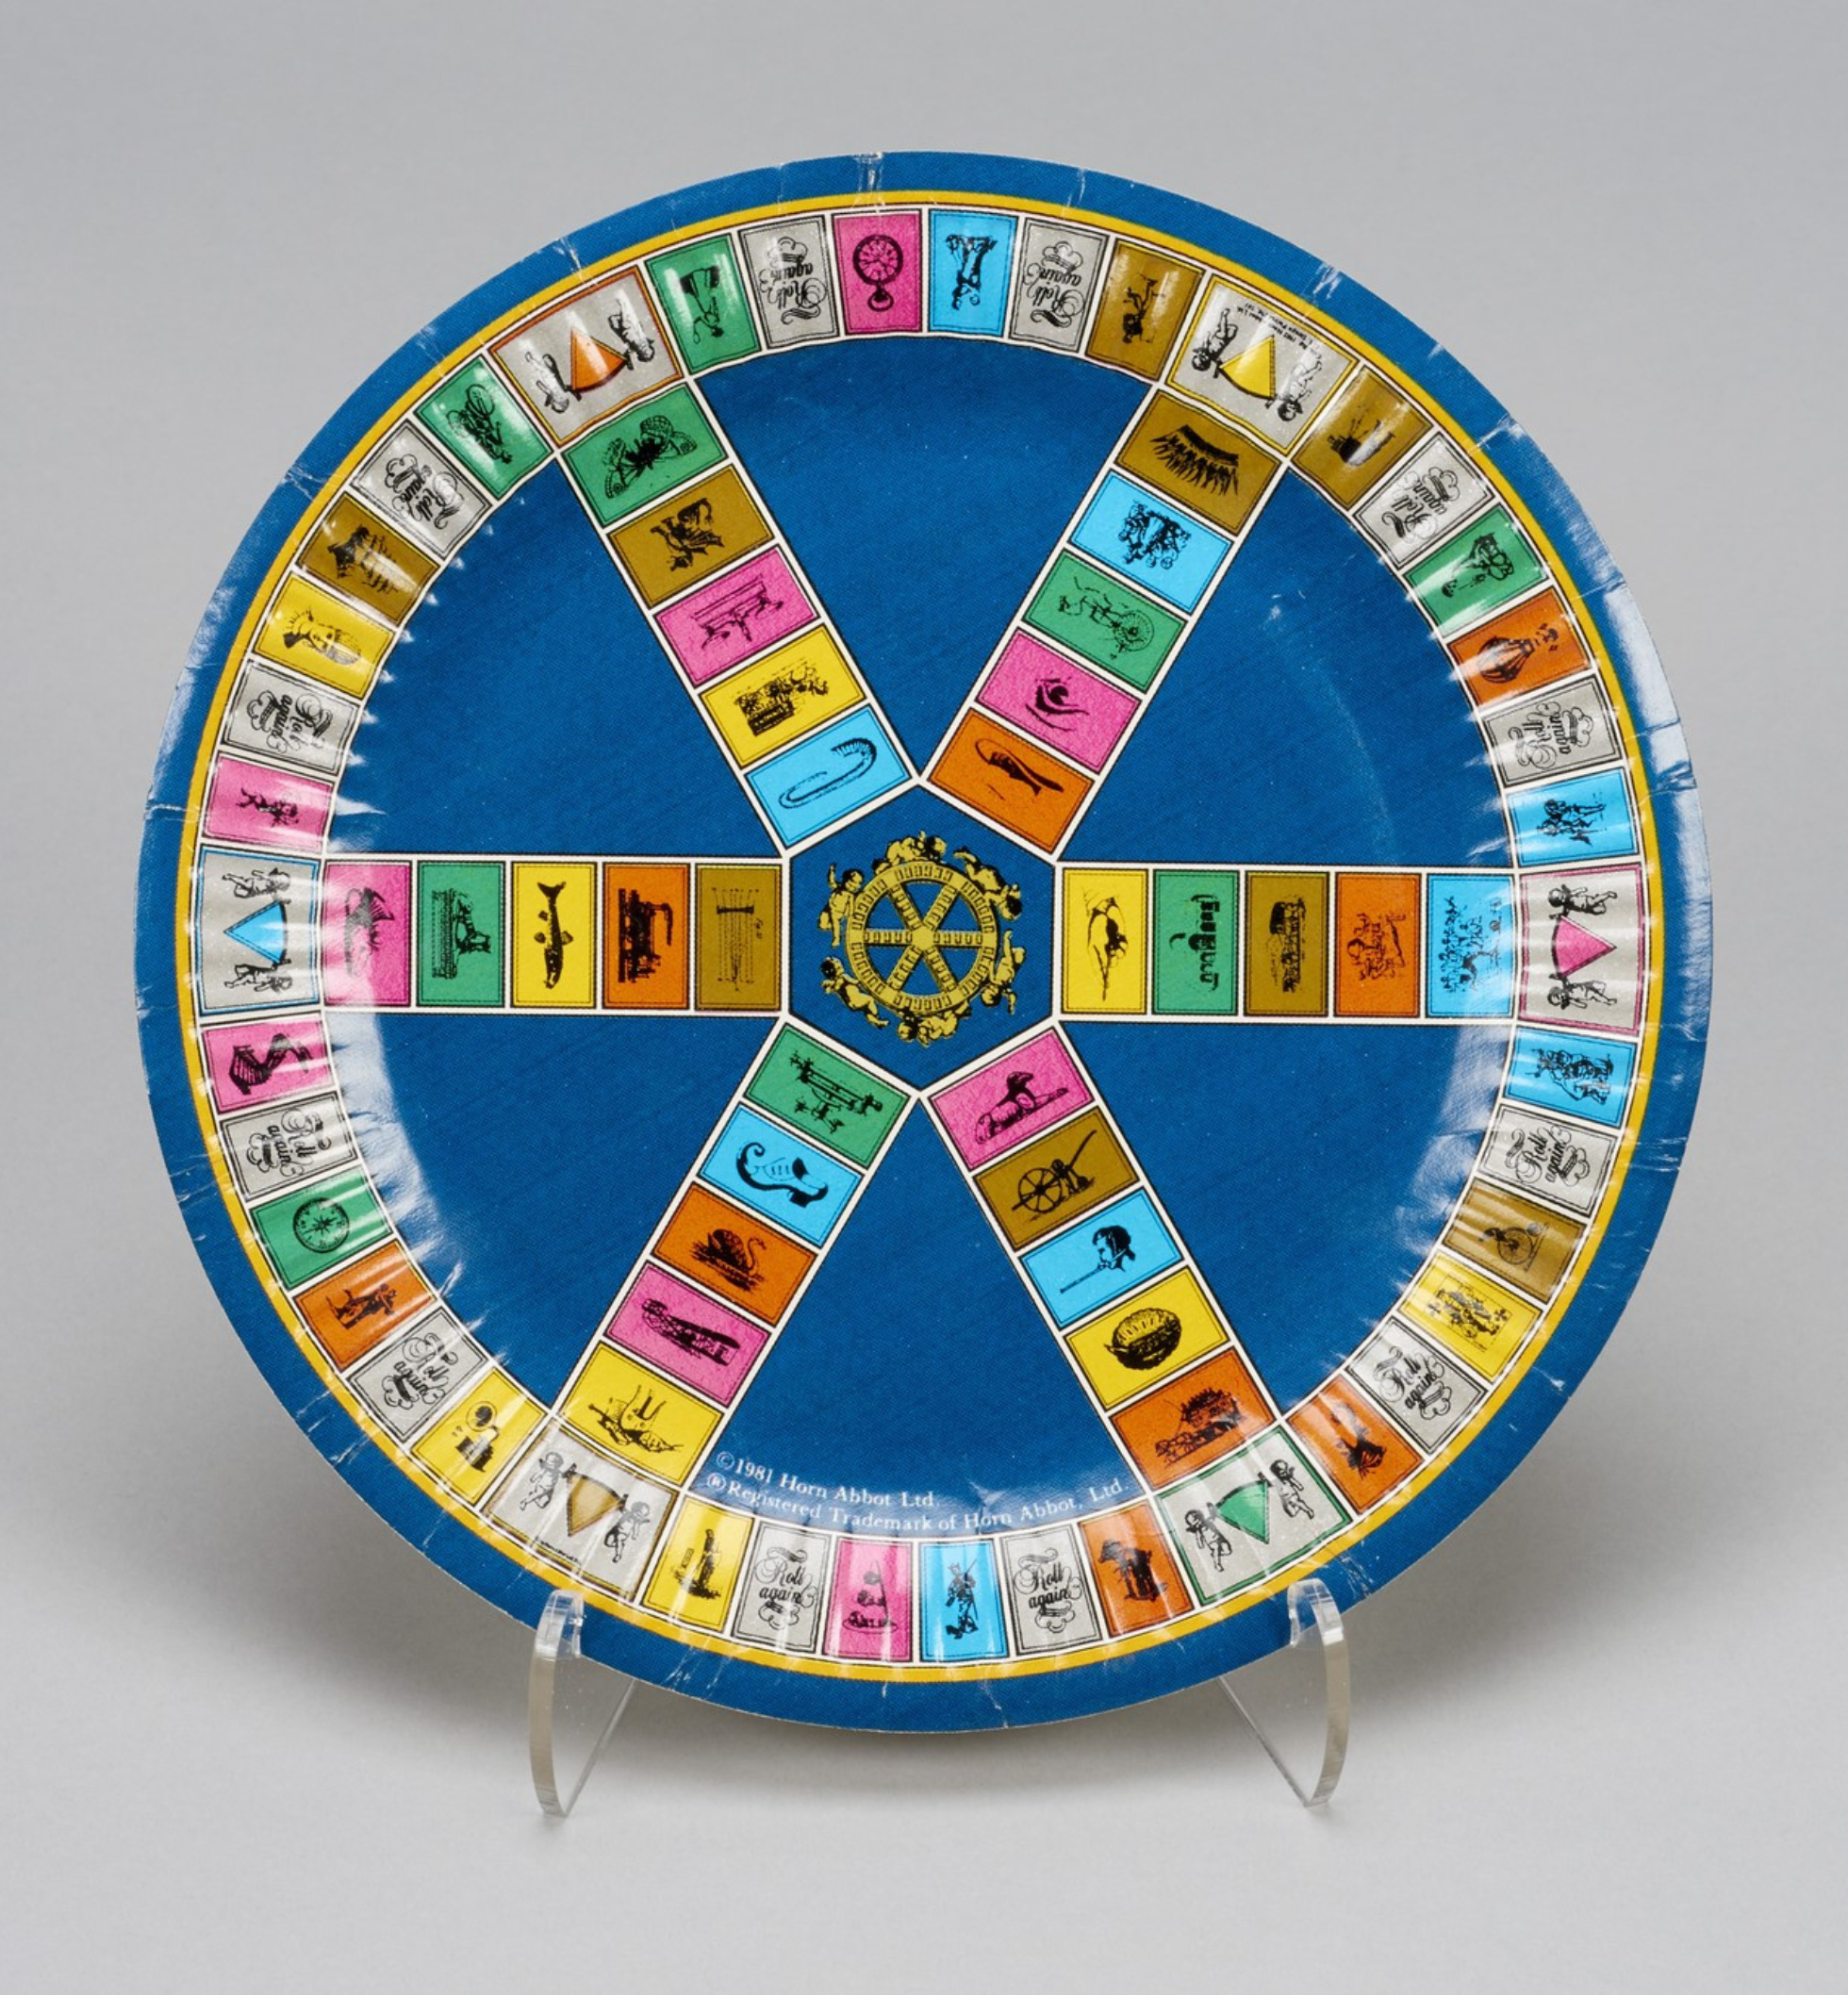 Who Invented Trivial Pursuit?